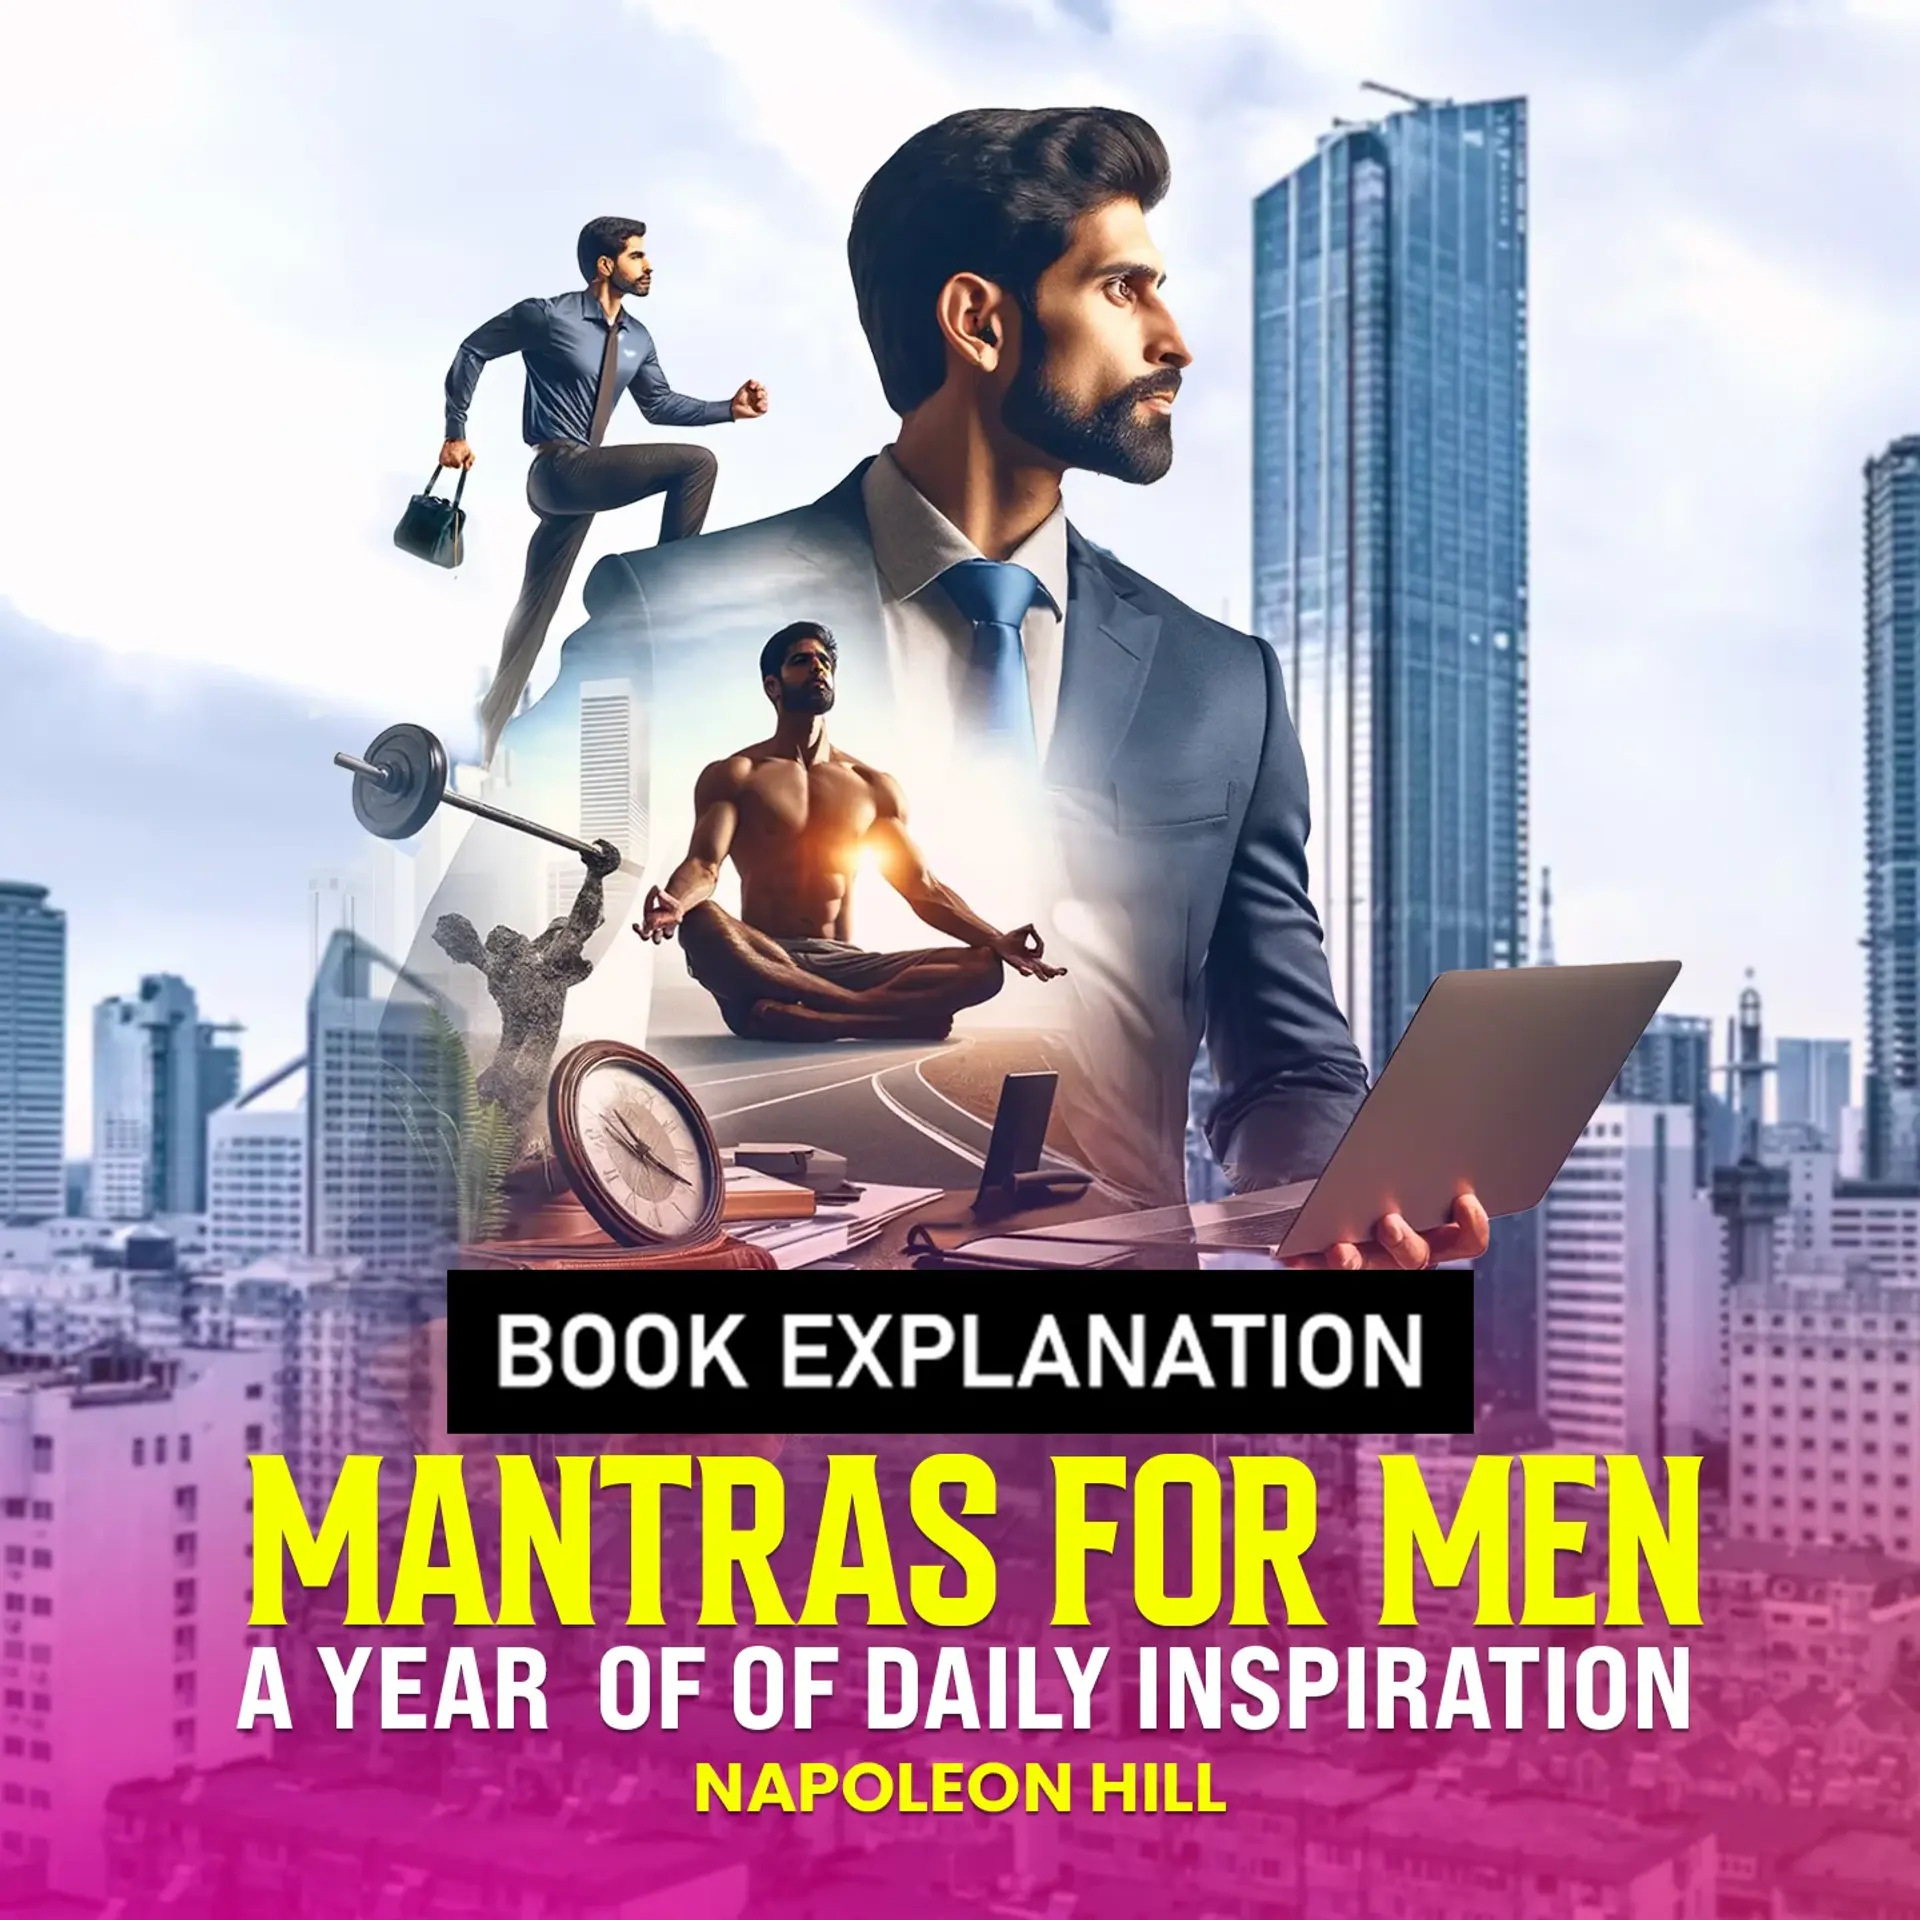  Mantras For Men: A Year of Daily Inspiration | 